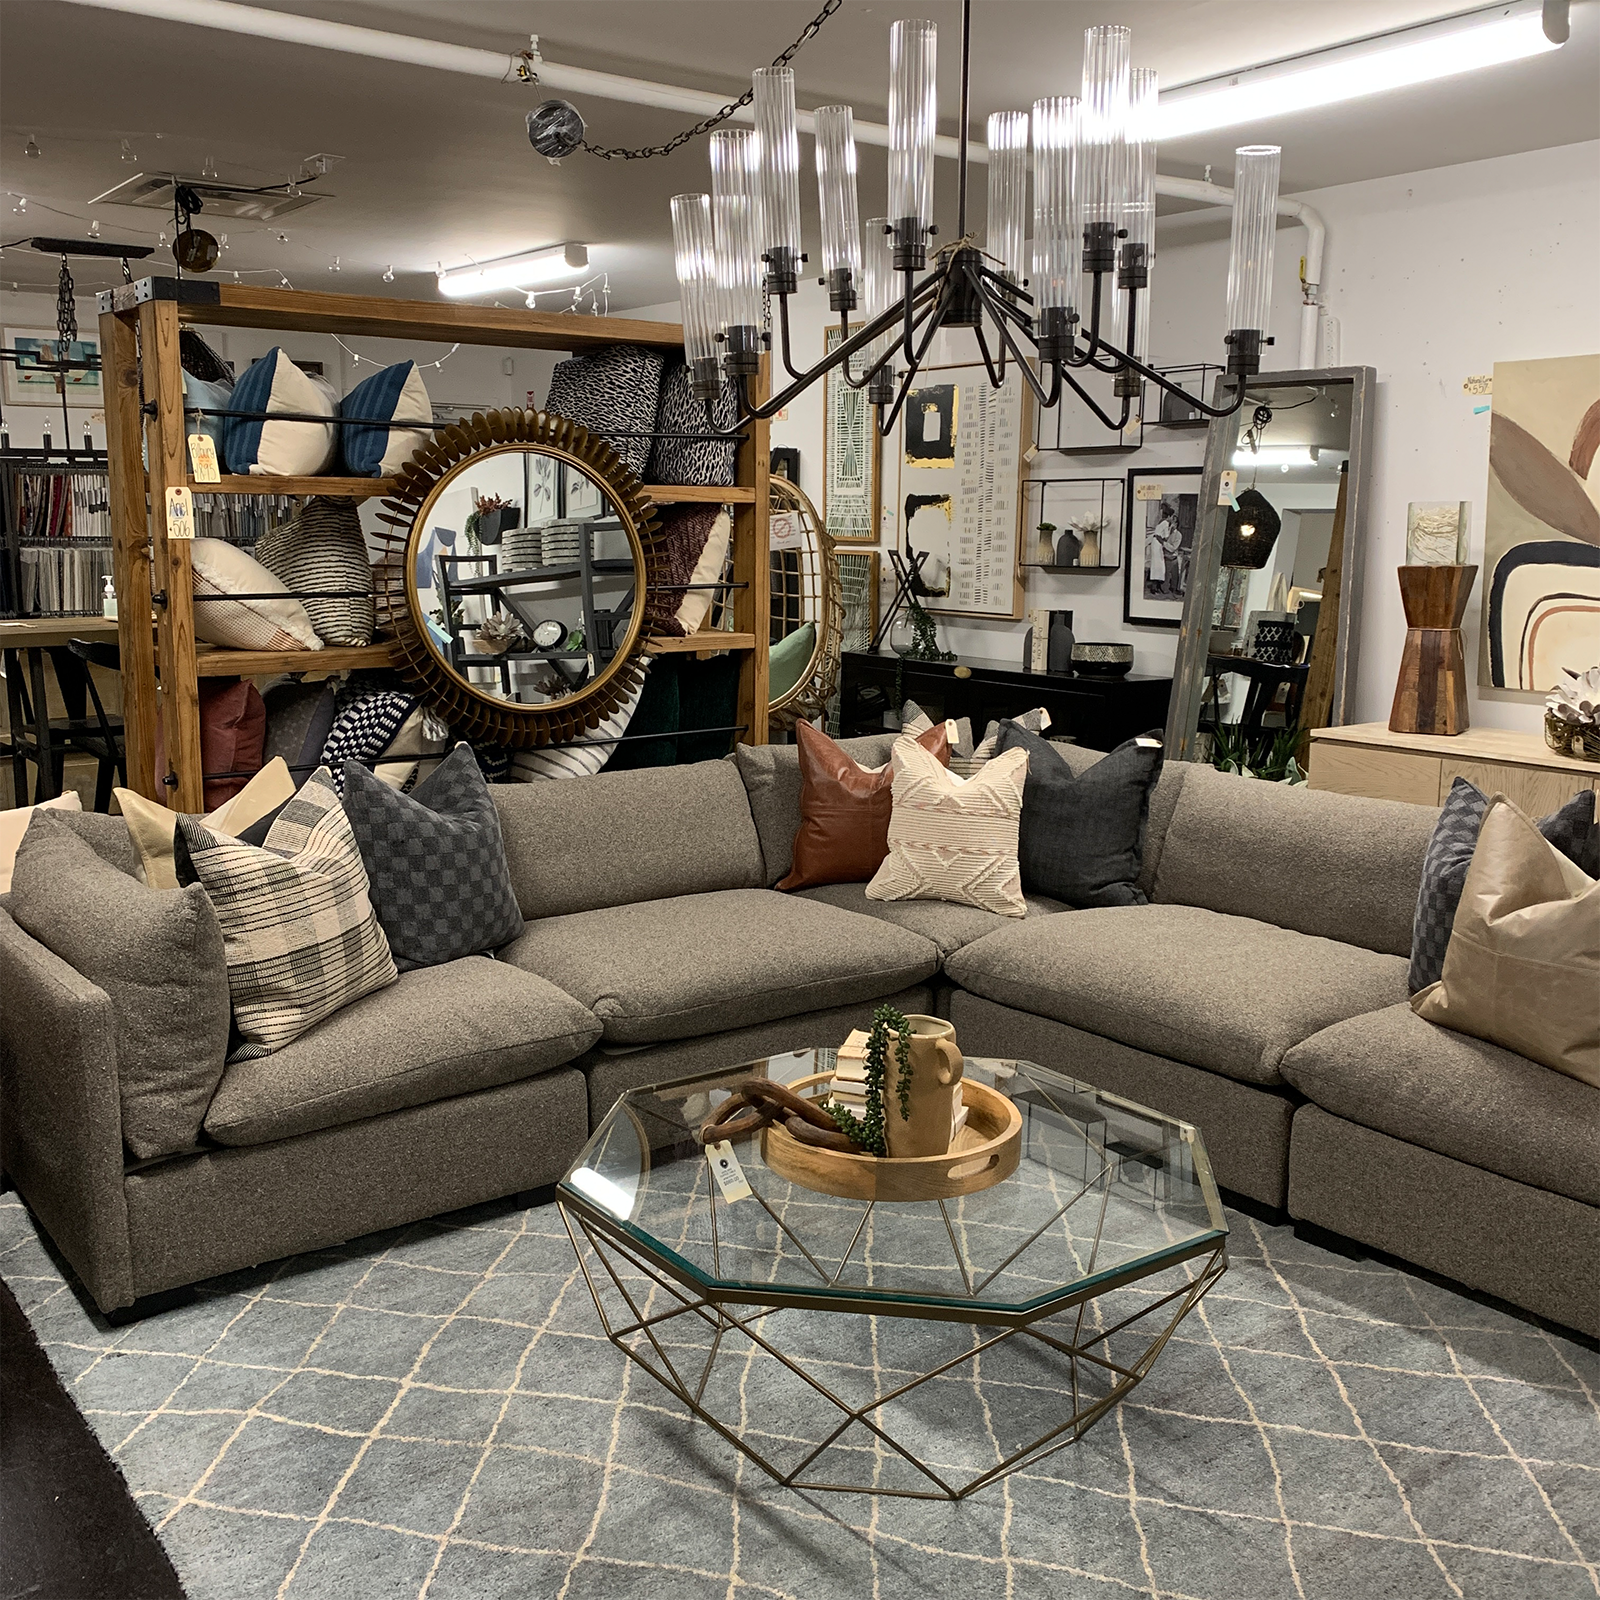 Centra Sectional